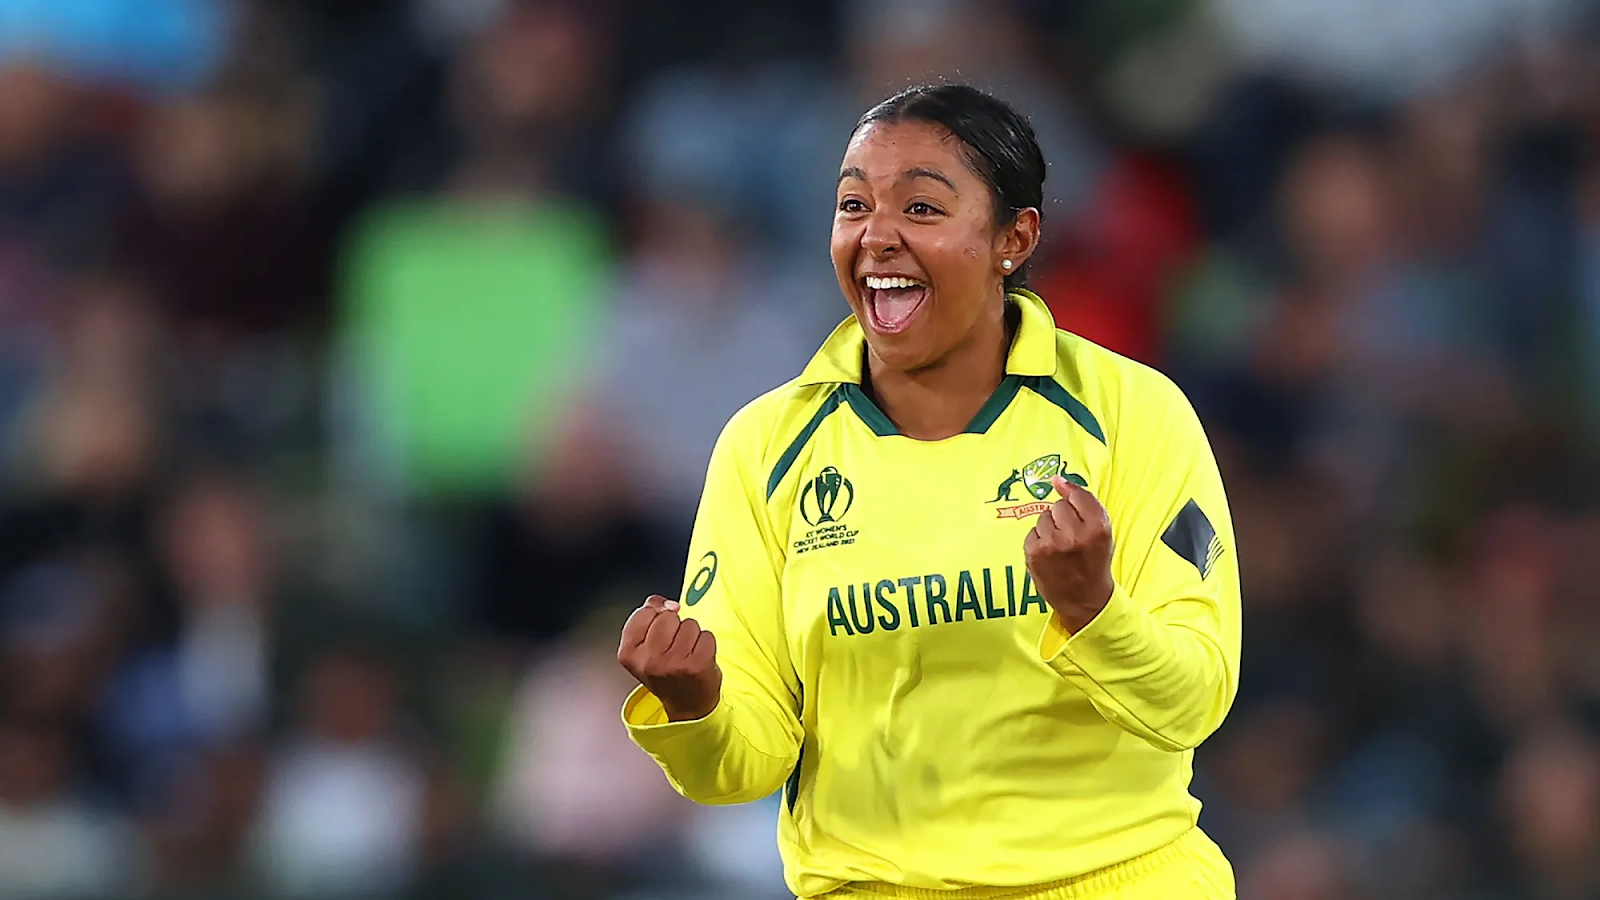 Alana King was the star with the ball for Australia